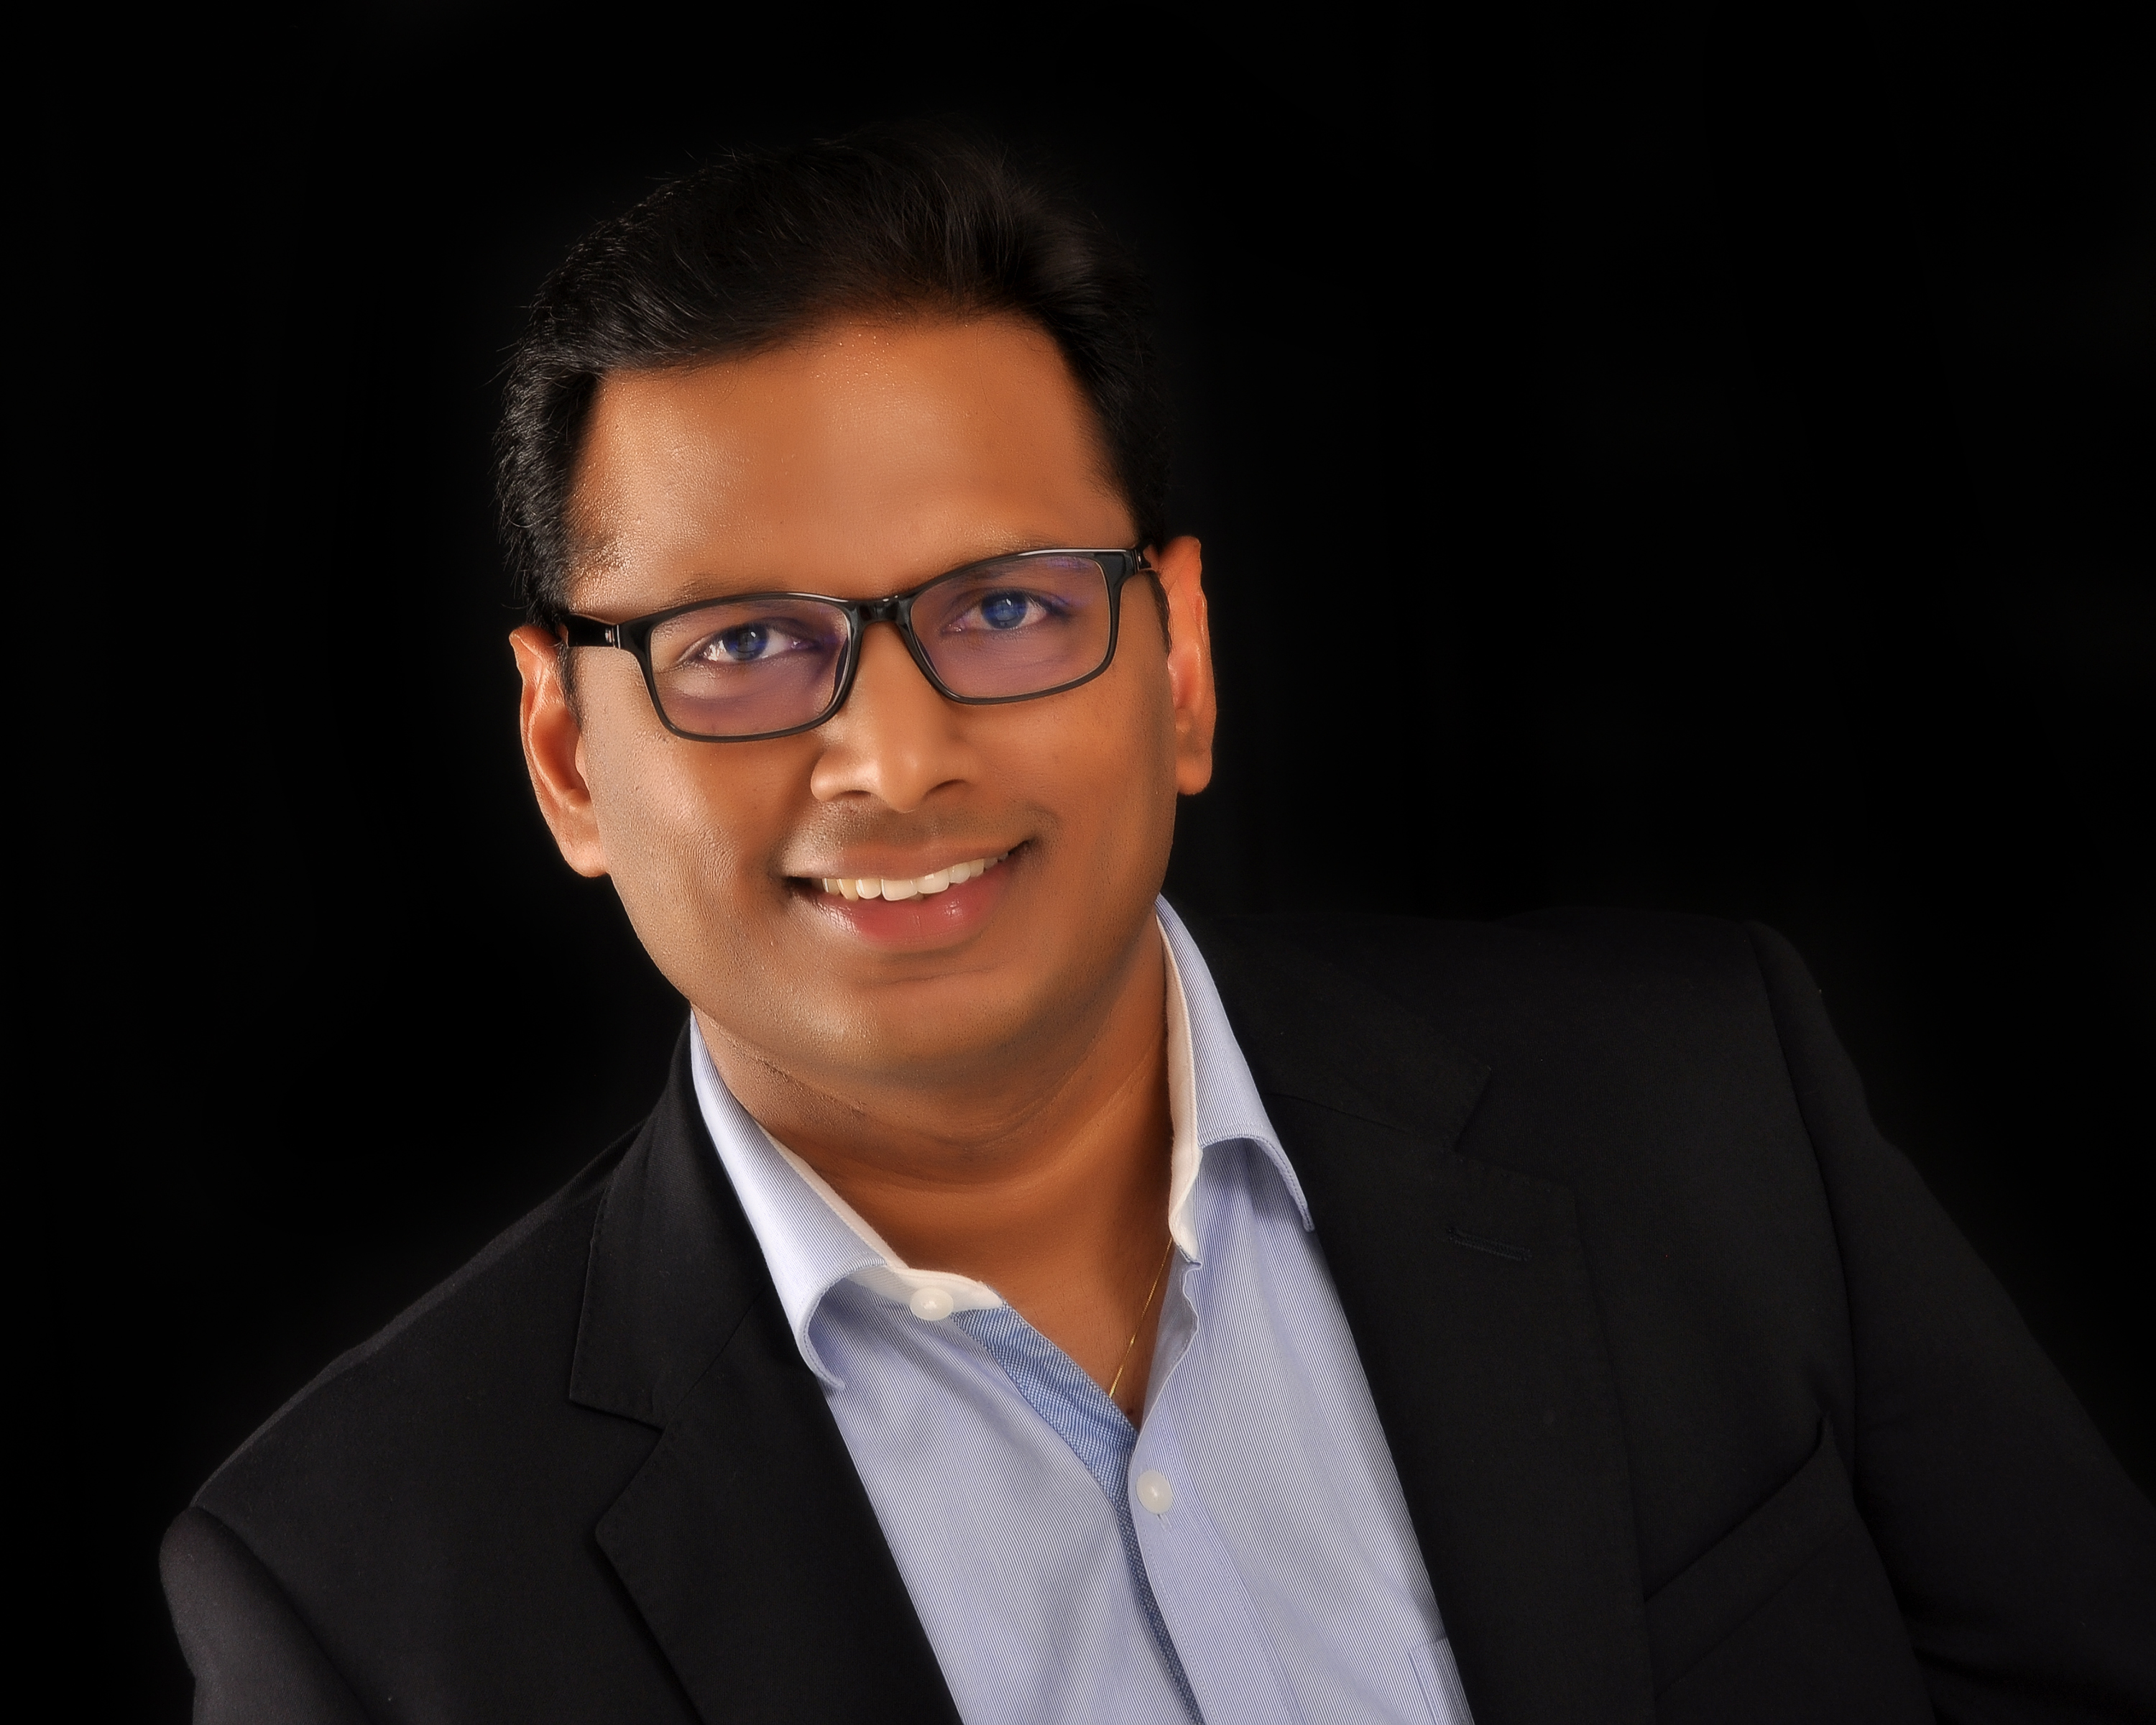 KT Prasad, <span>MD and RVP, India Subcontinent <br> Zendesk</span>